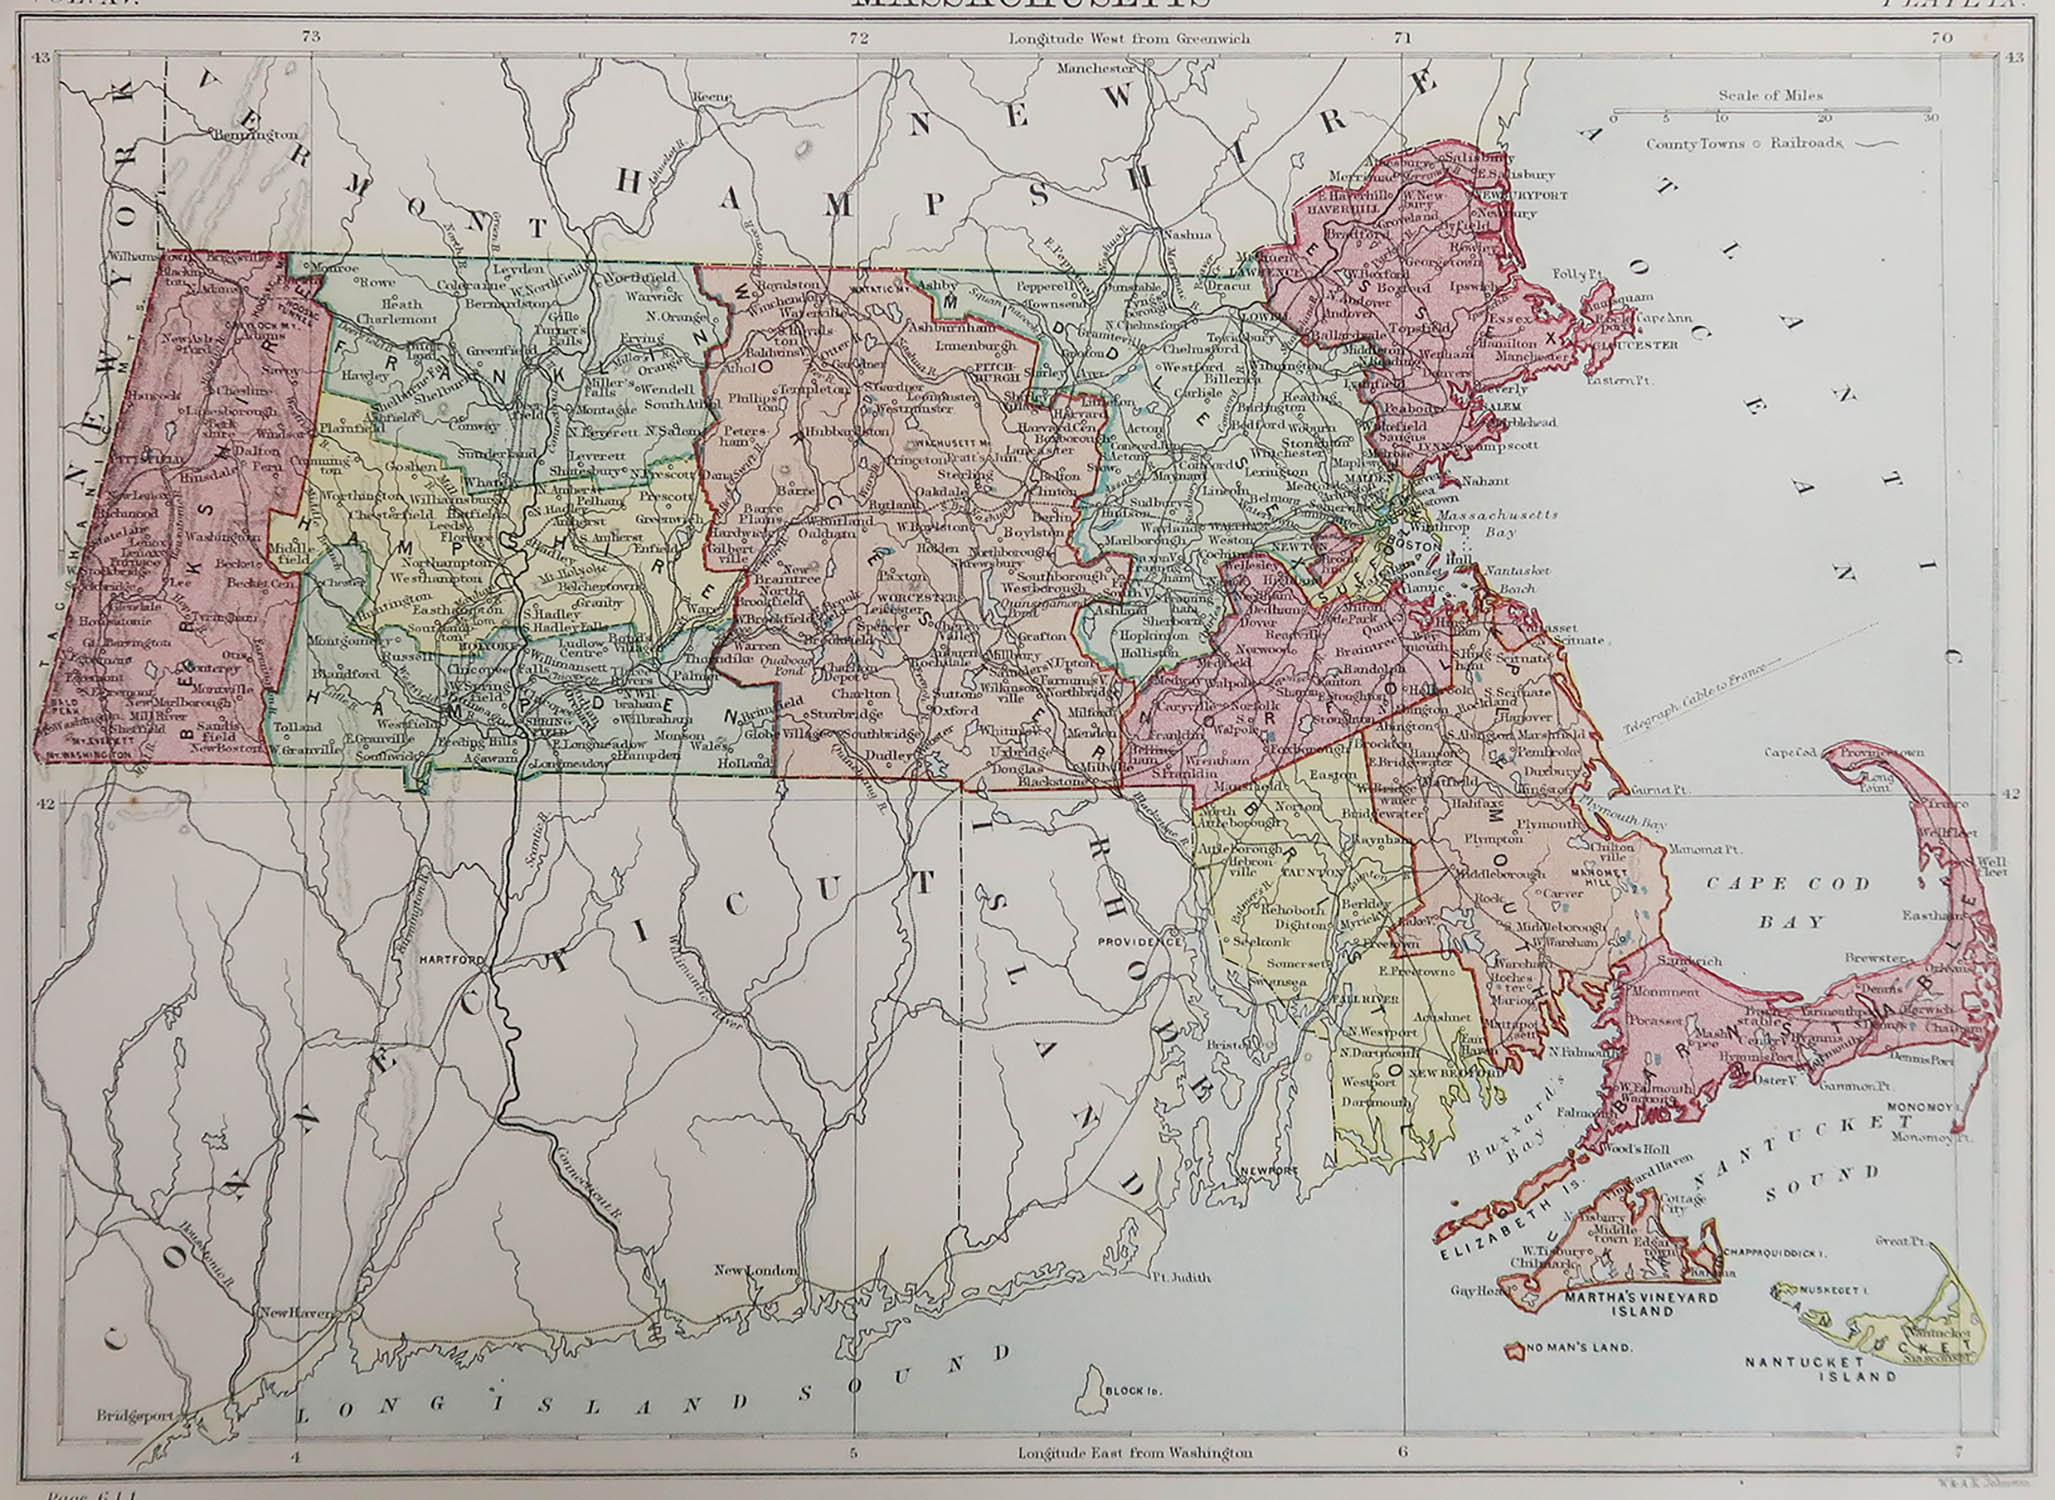 Great map of Massachusetts

Drawn and Engraved by W. & A.K. Johnston

Published By A & C Black, Edinburgh.

Original colour

Unframed.








